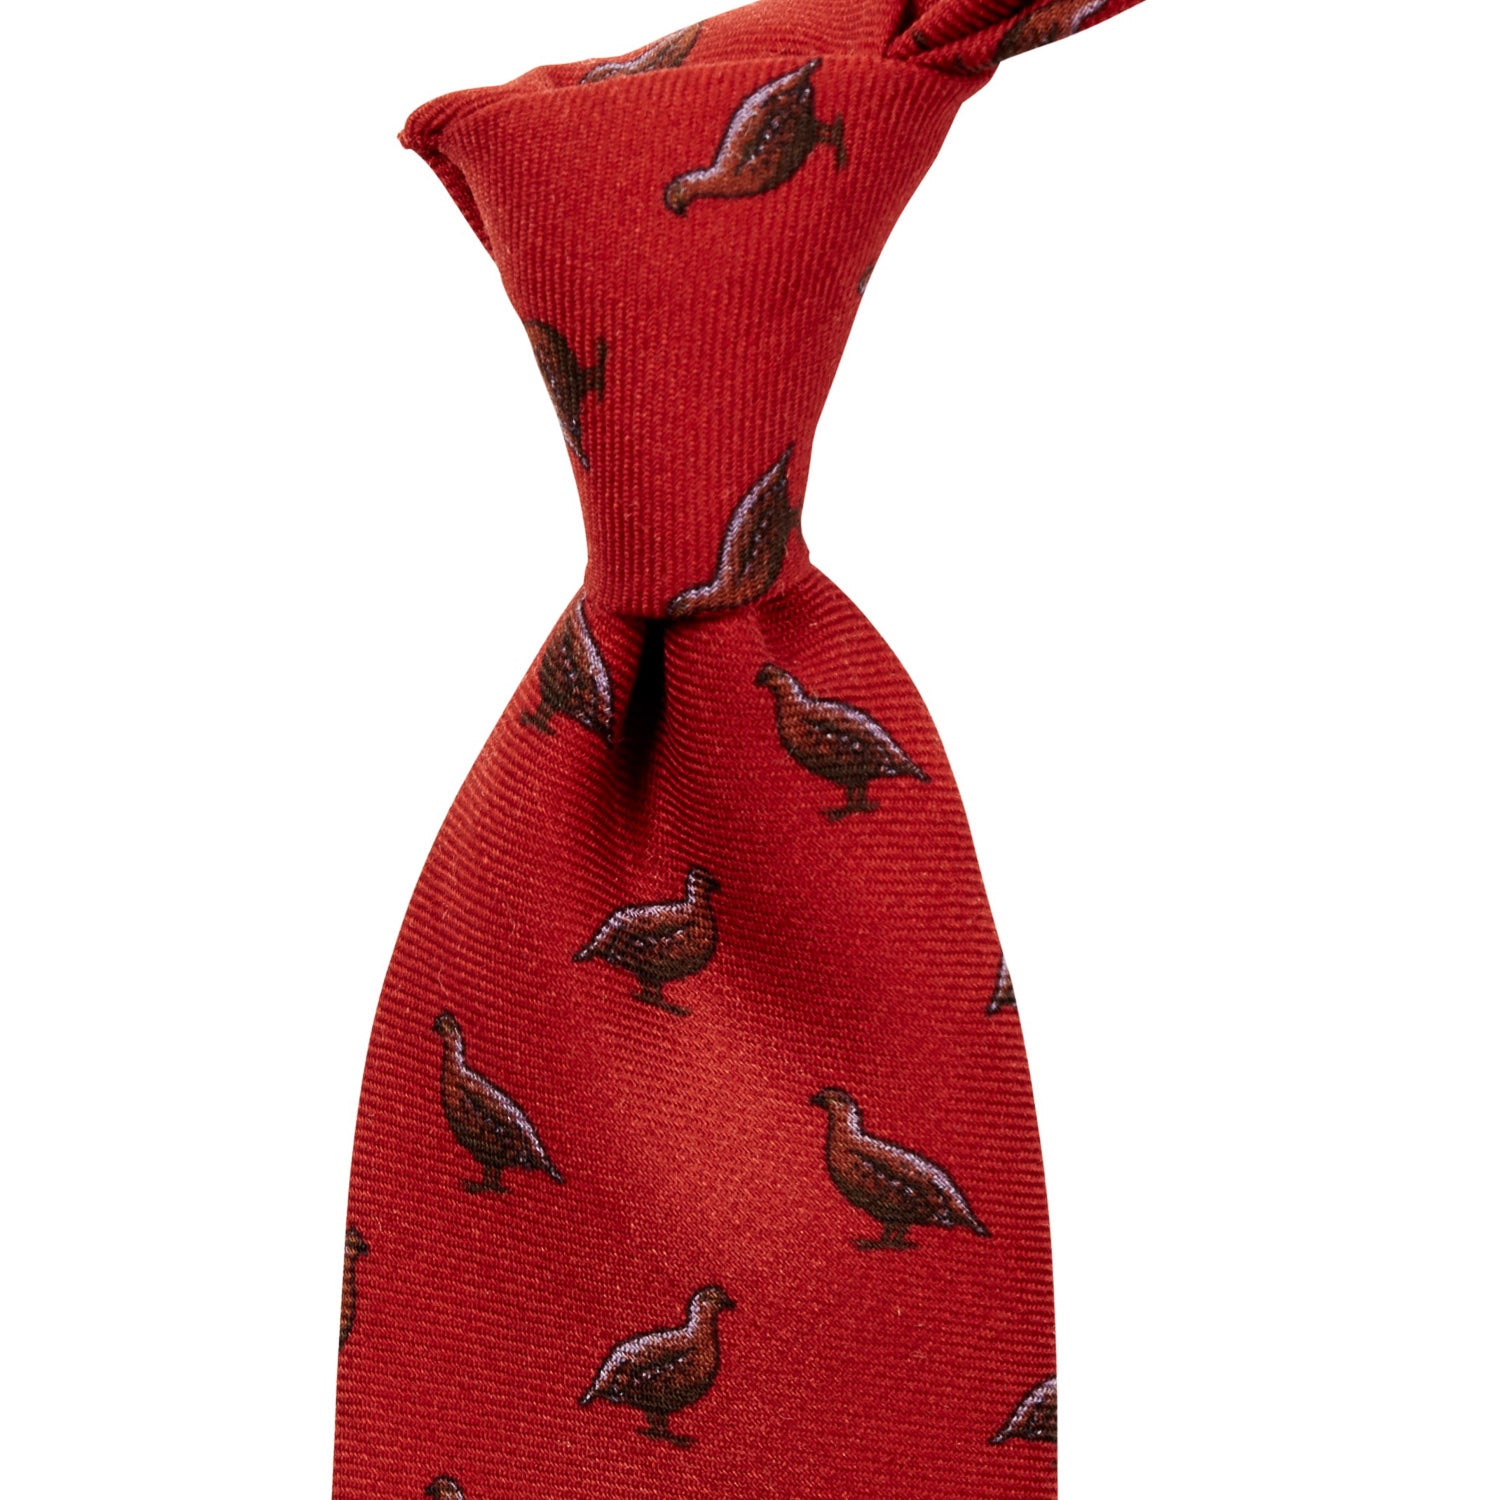 A Sovereign Grade 100% Wool Regency Quail Shooting Tie with pheasants on it, handmade in the United Kingdom by KirbyAllison.com.